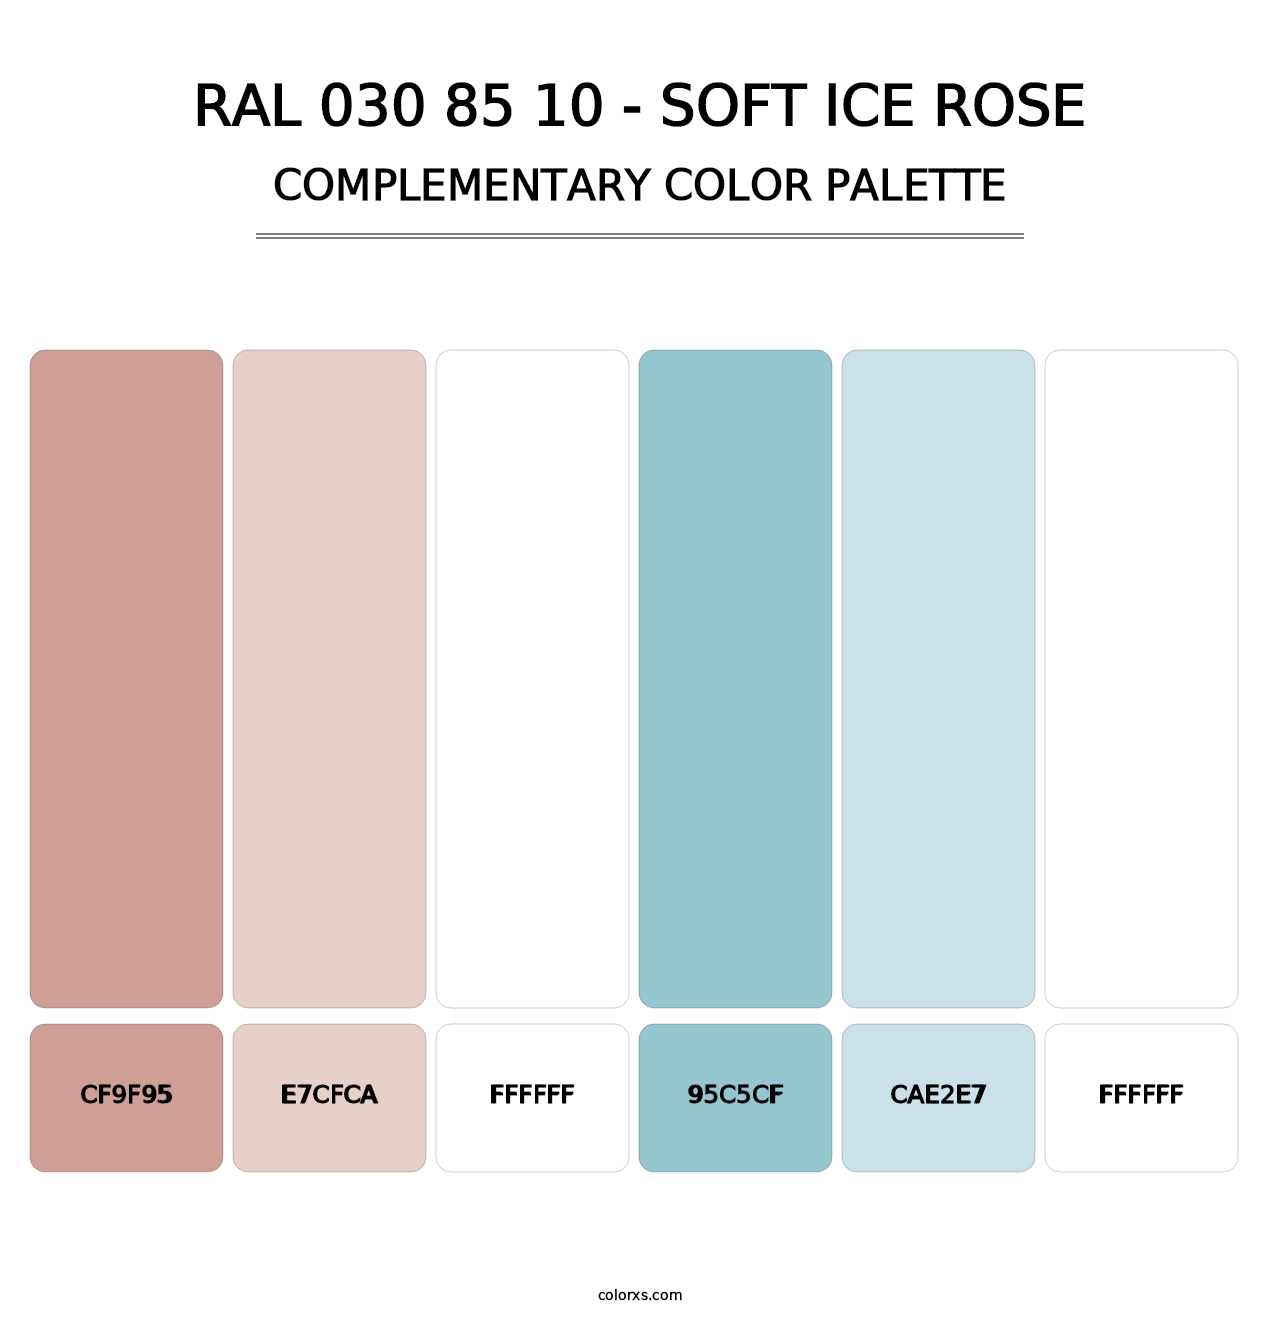 RAL 030 85 10 - Soft Ice Rose - Complementary Color Palette